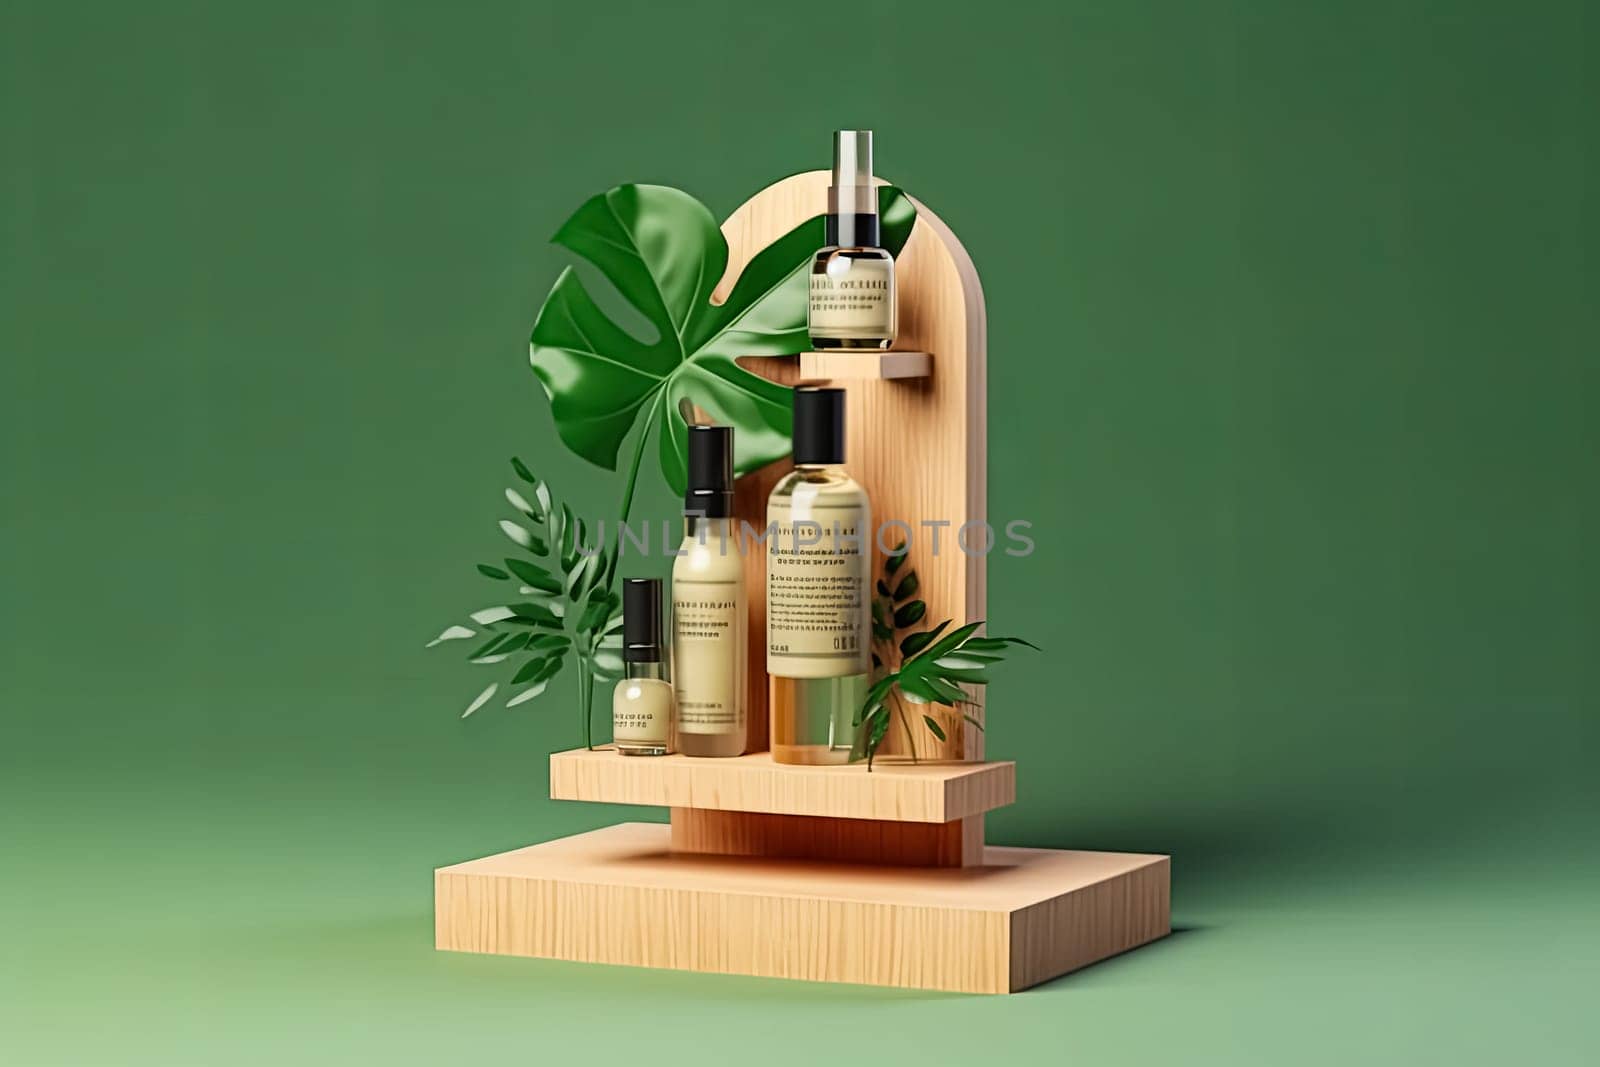 Skincare cosmetics displayed on a podium against a green background.